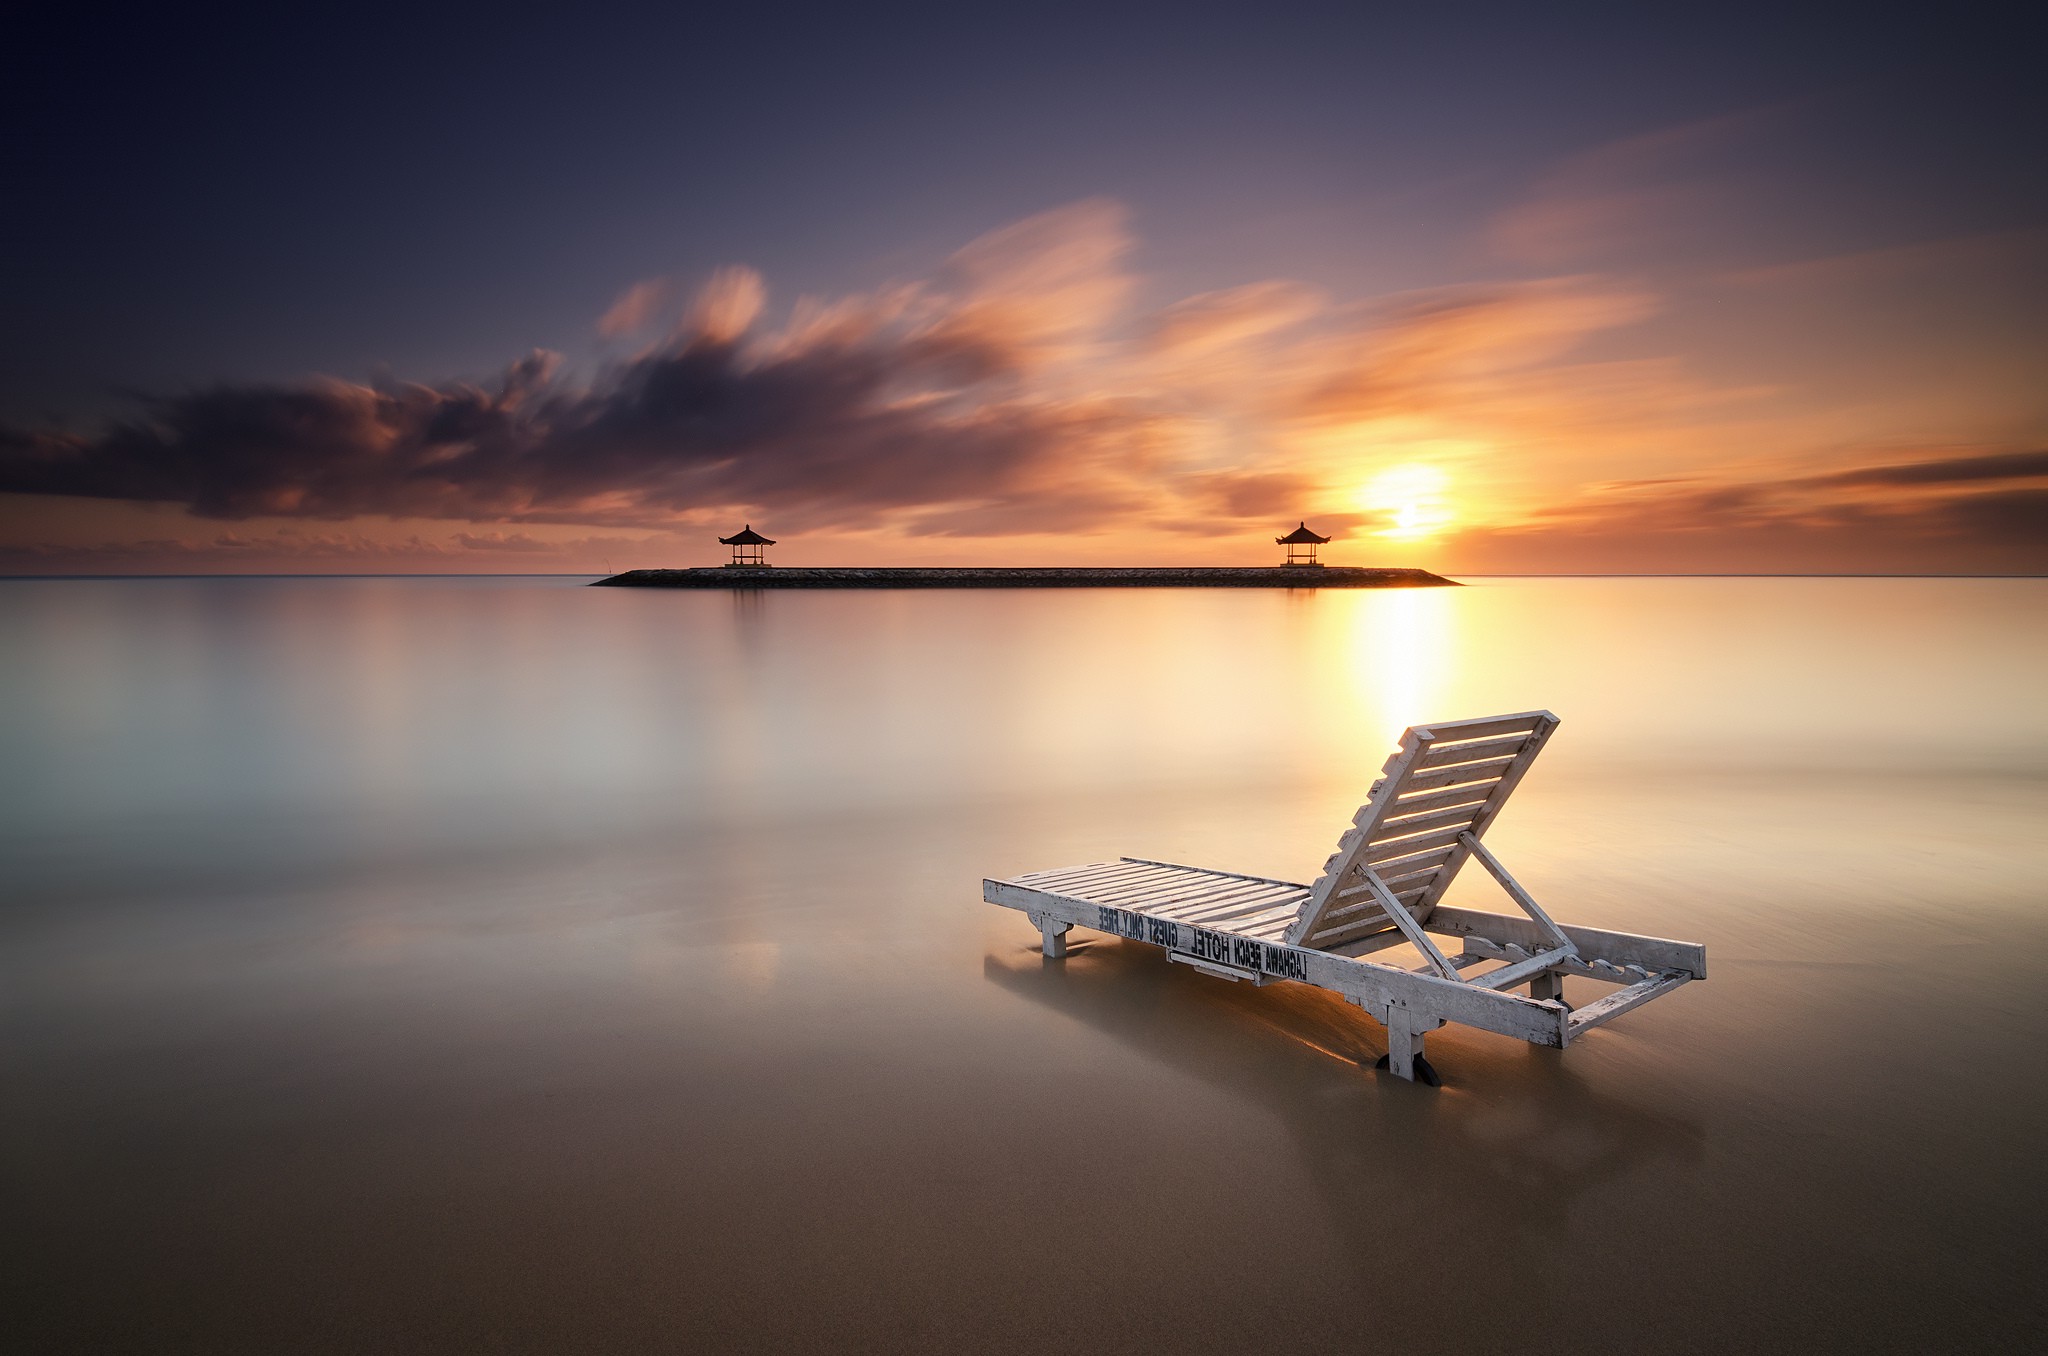 Indonesia, Beach, Bali, Village, Landscape, Sunset, Sea, Chair, Photography, Water, Clouds, Motion Blur, Luxury, Deck Chairs Wallpaper